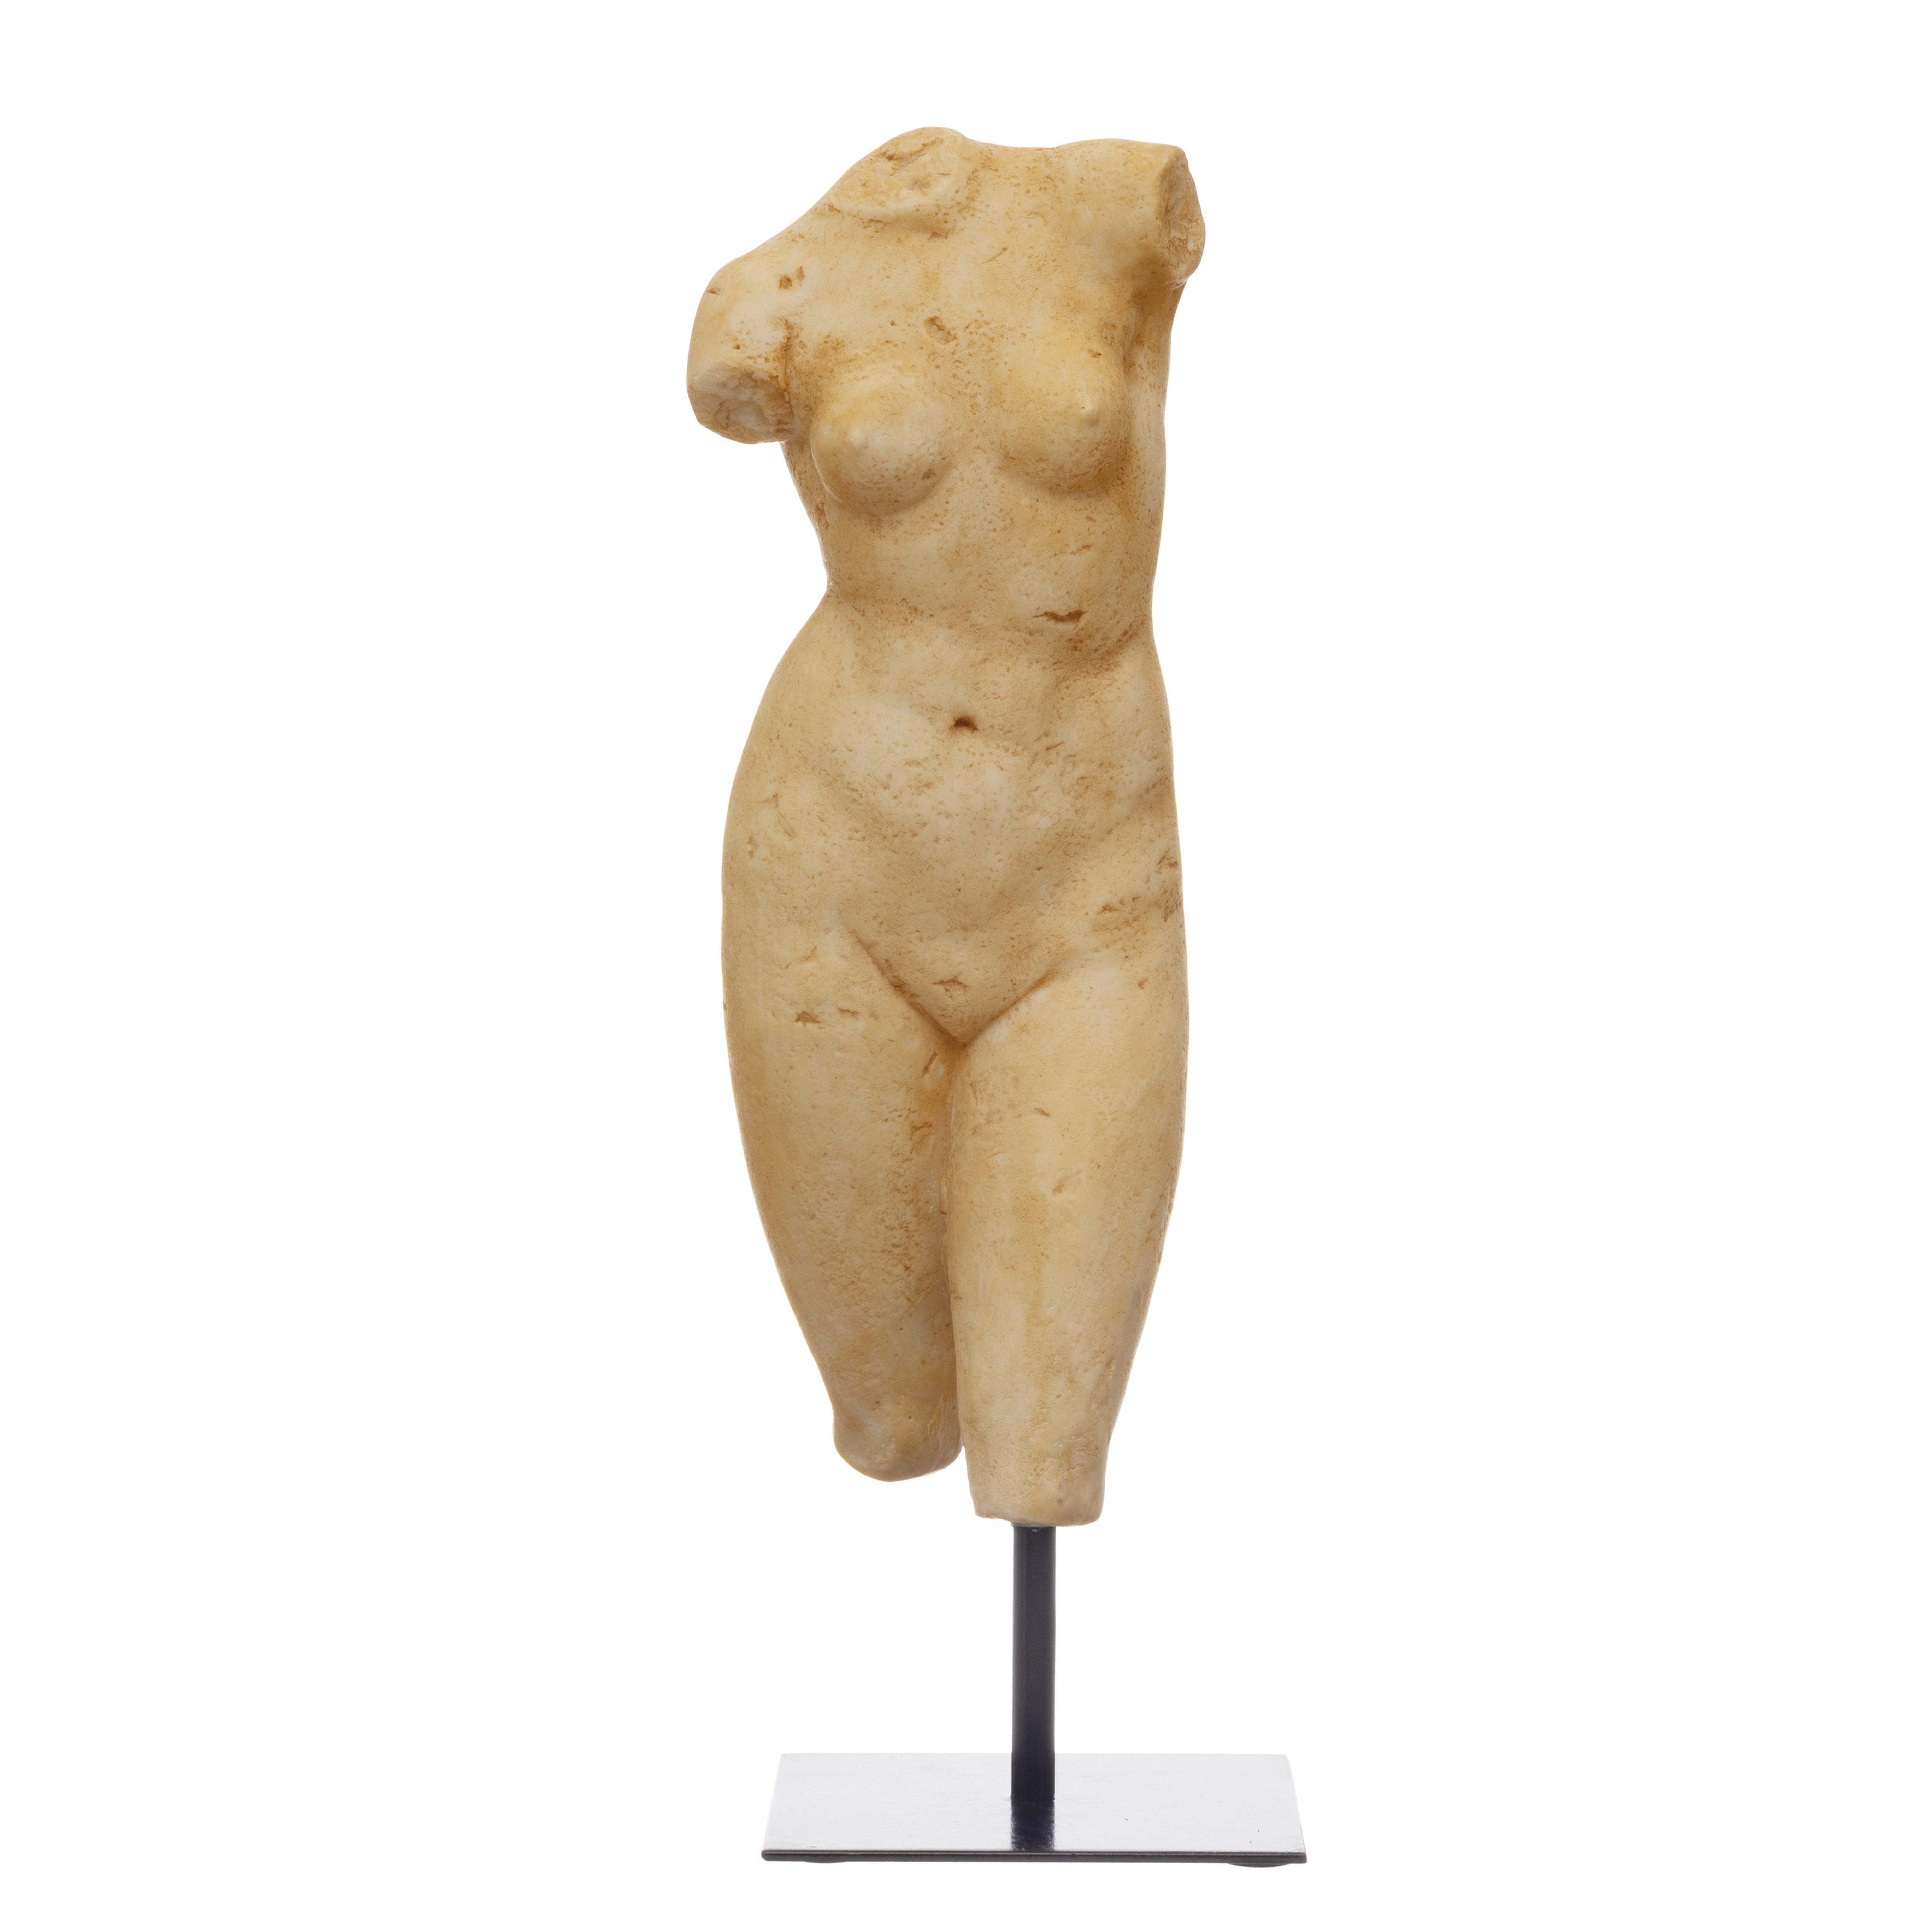 Resin Female Body Figure on Metal Stand, Plaster Finish - Nomad Home